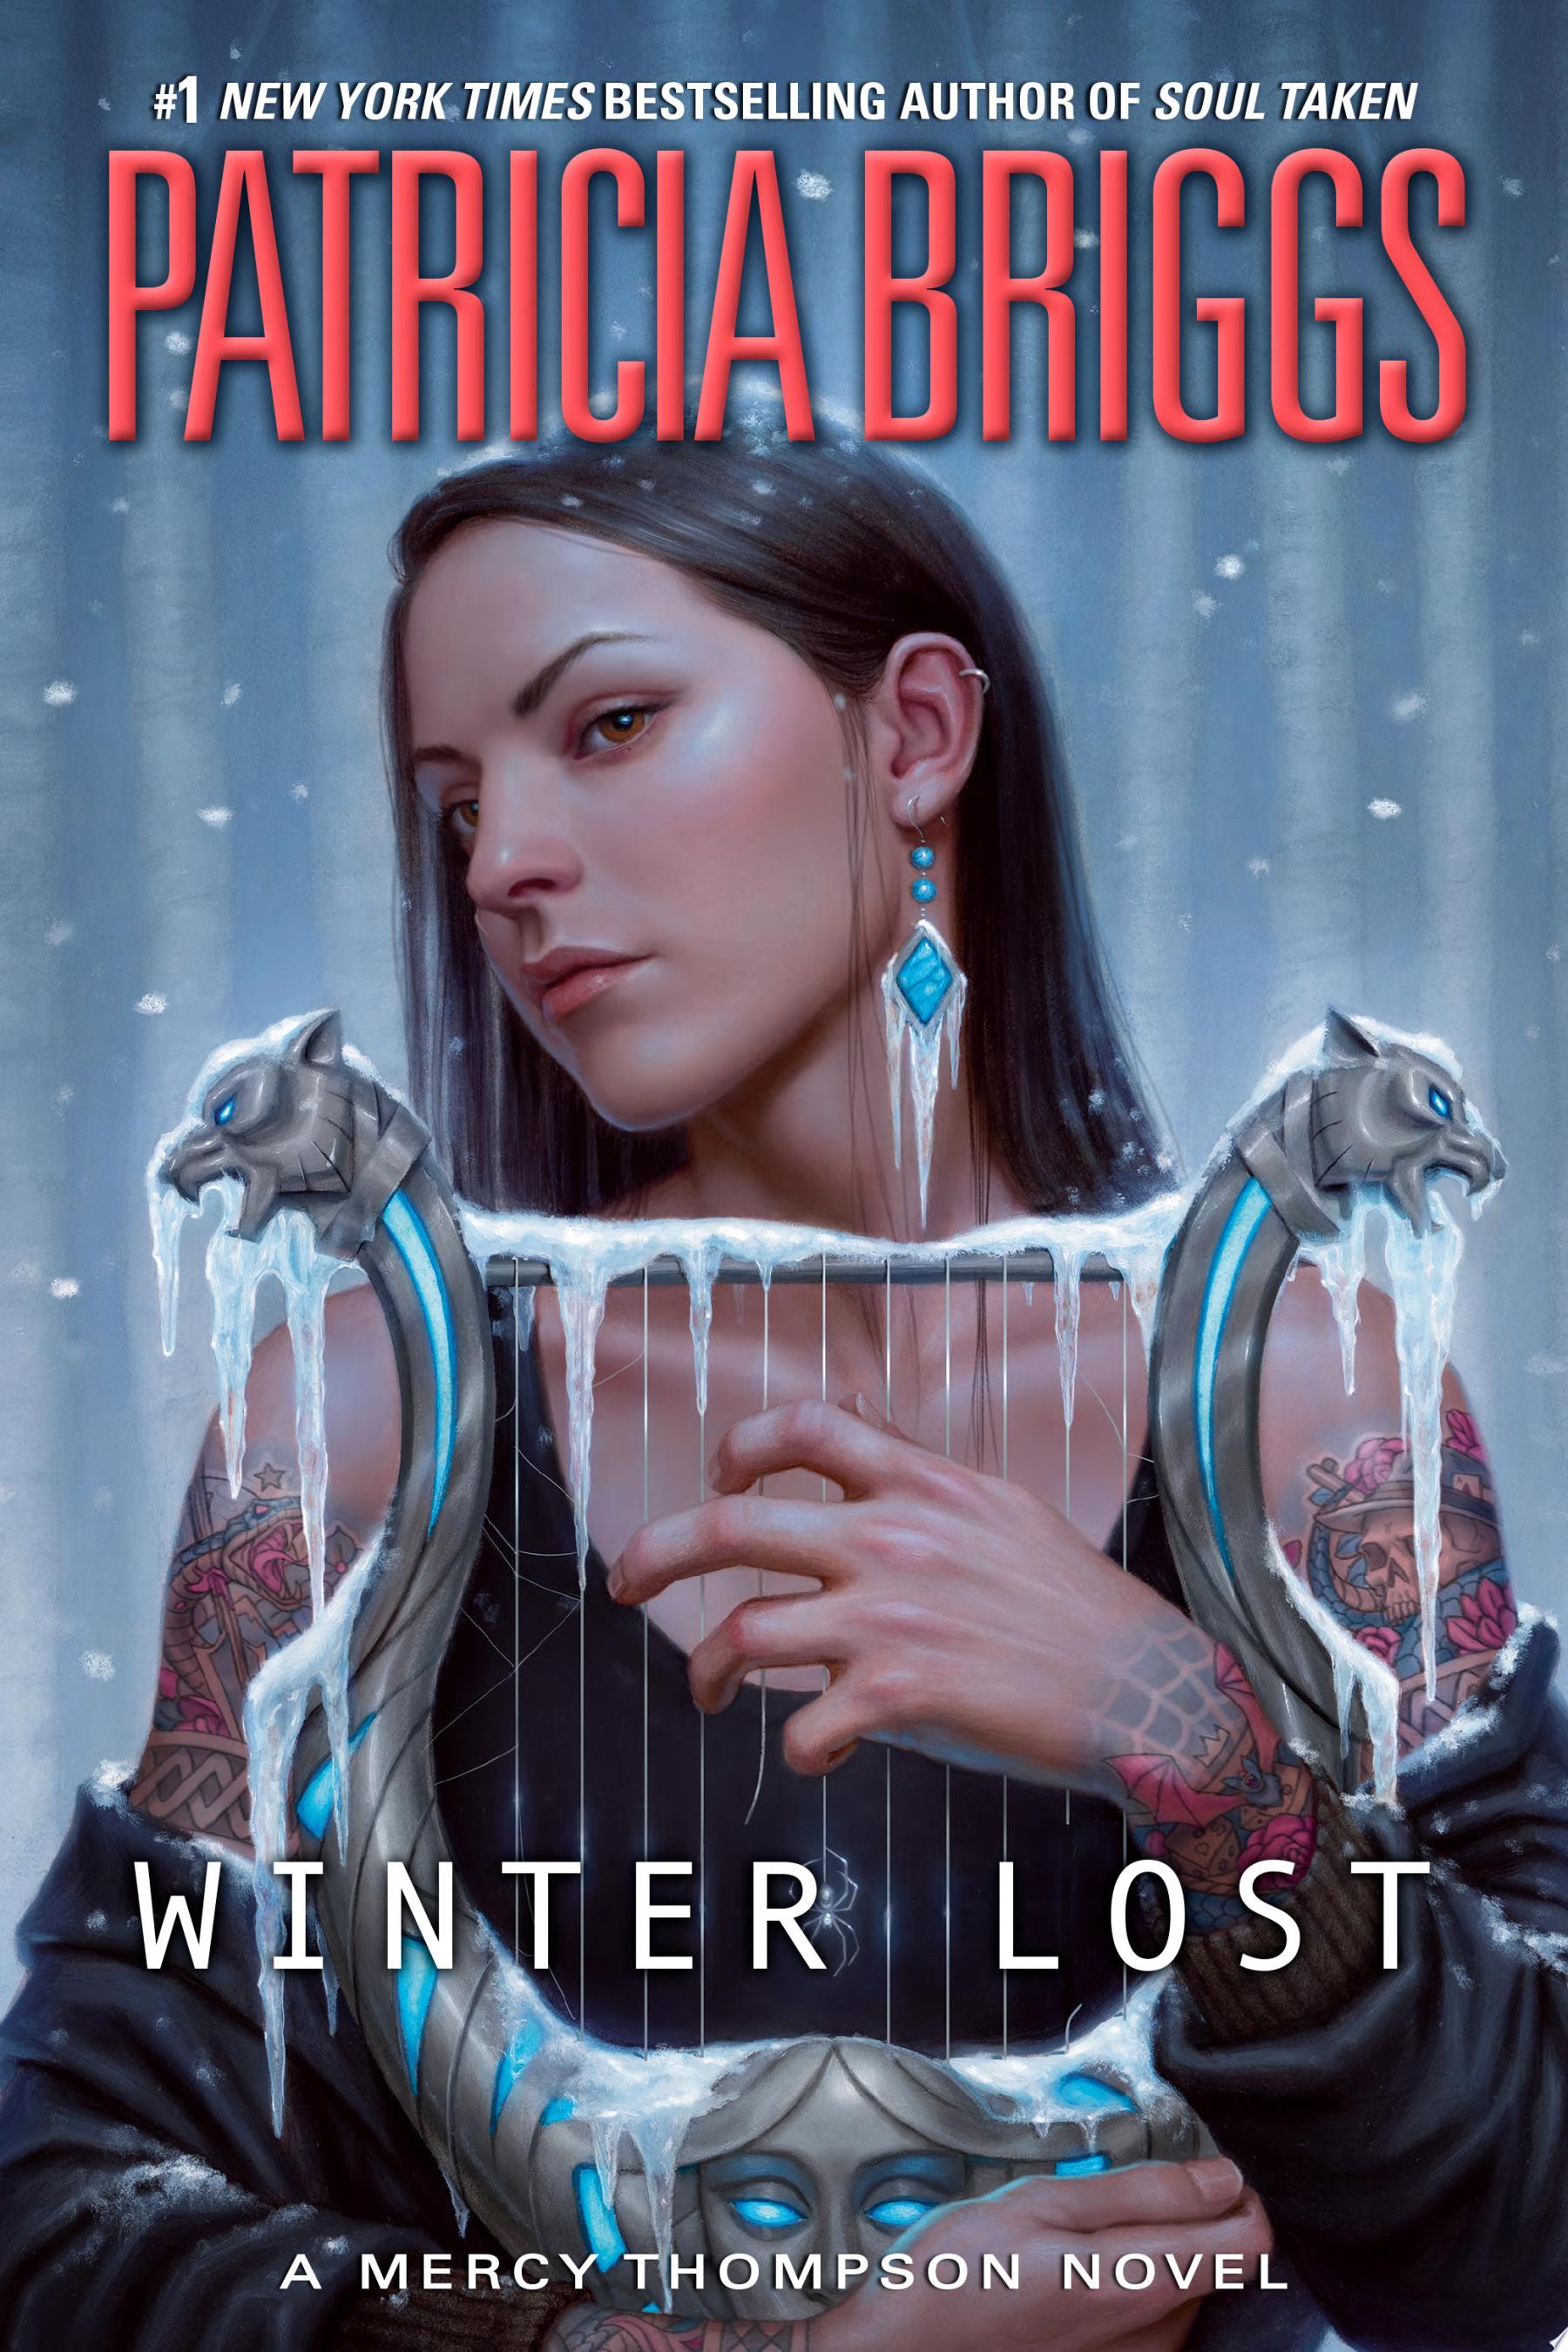 Image for "Winter Lost"